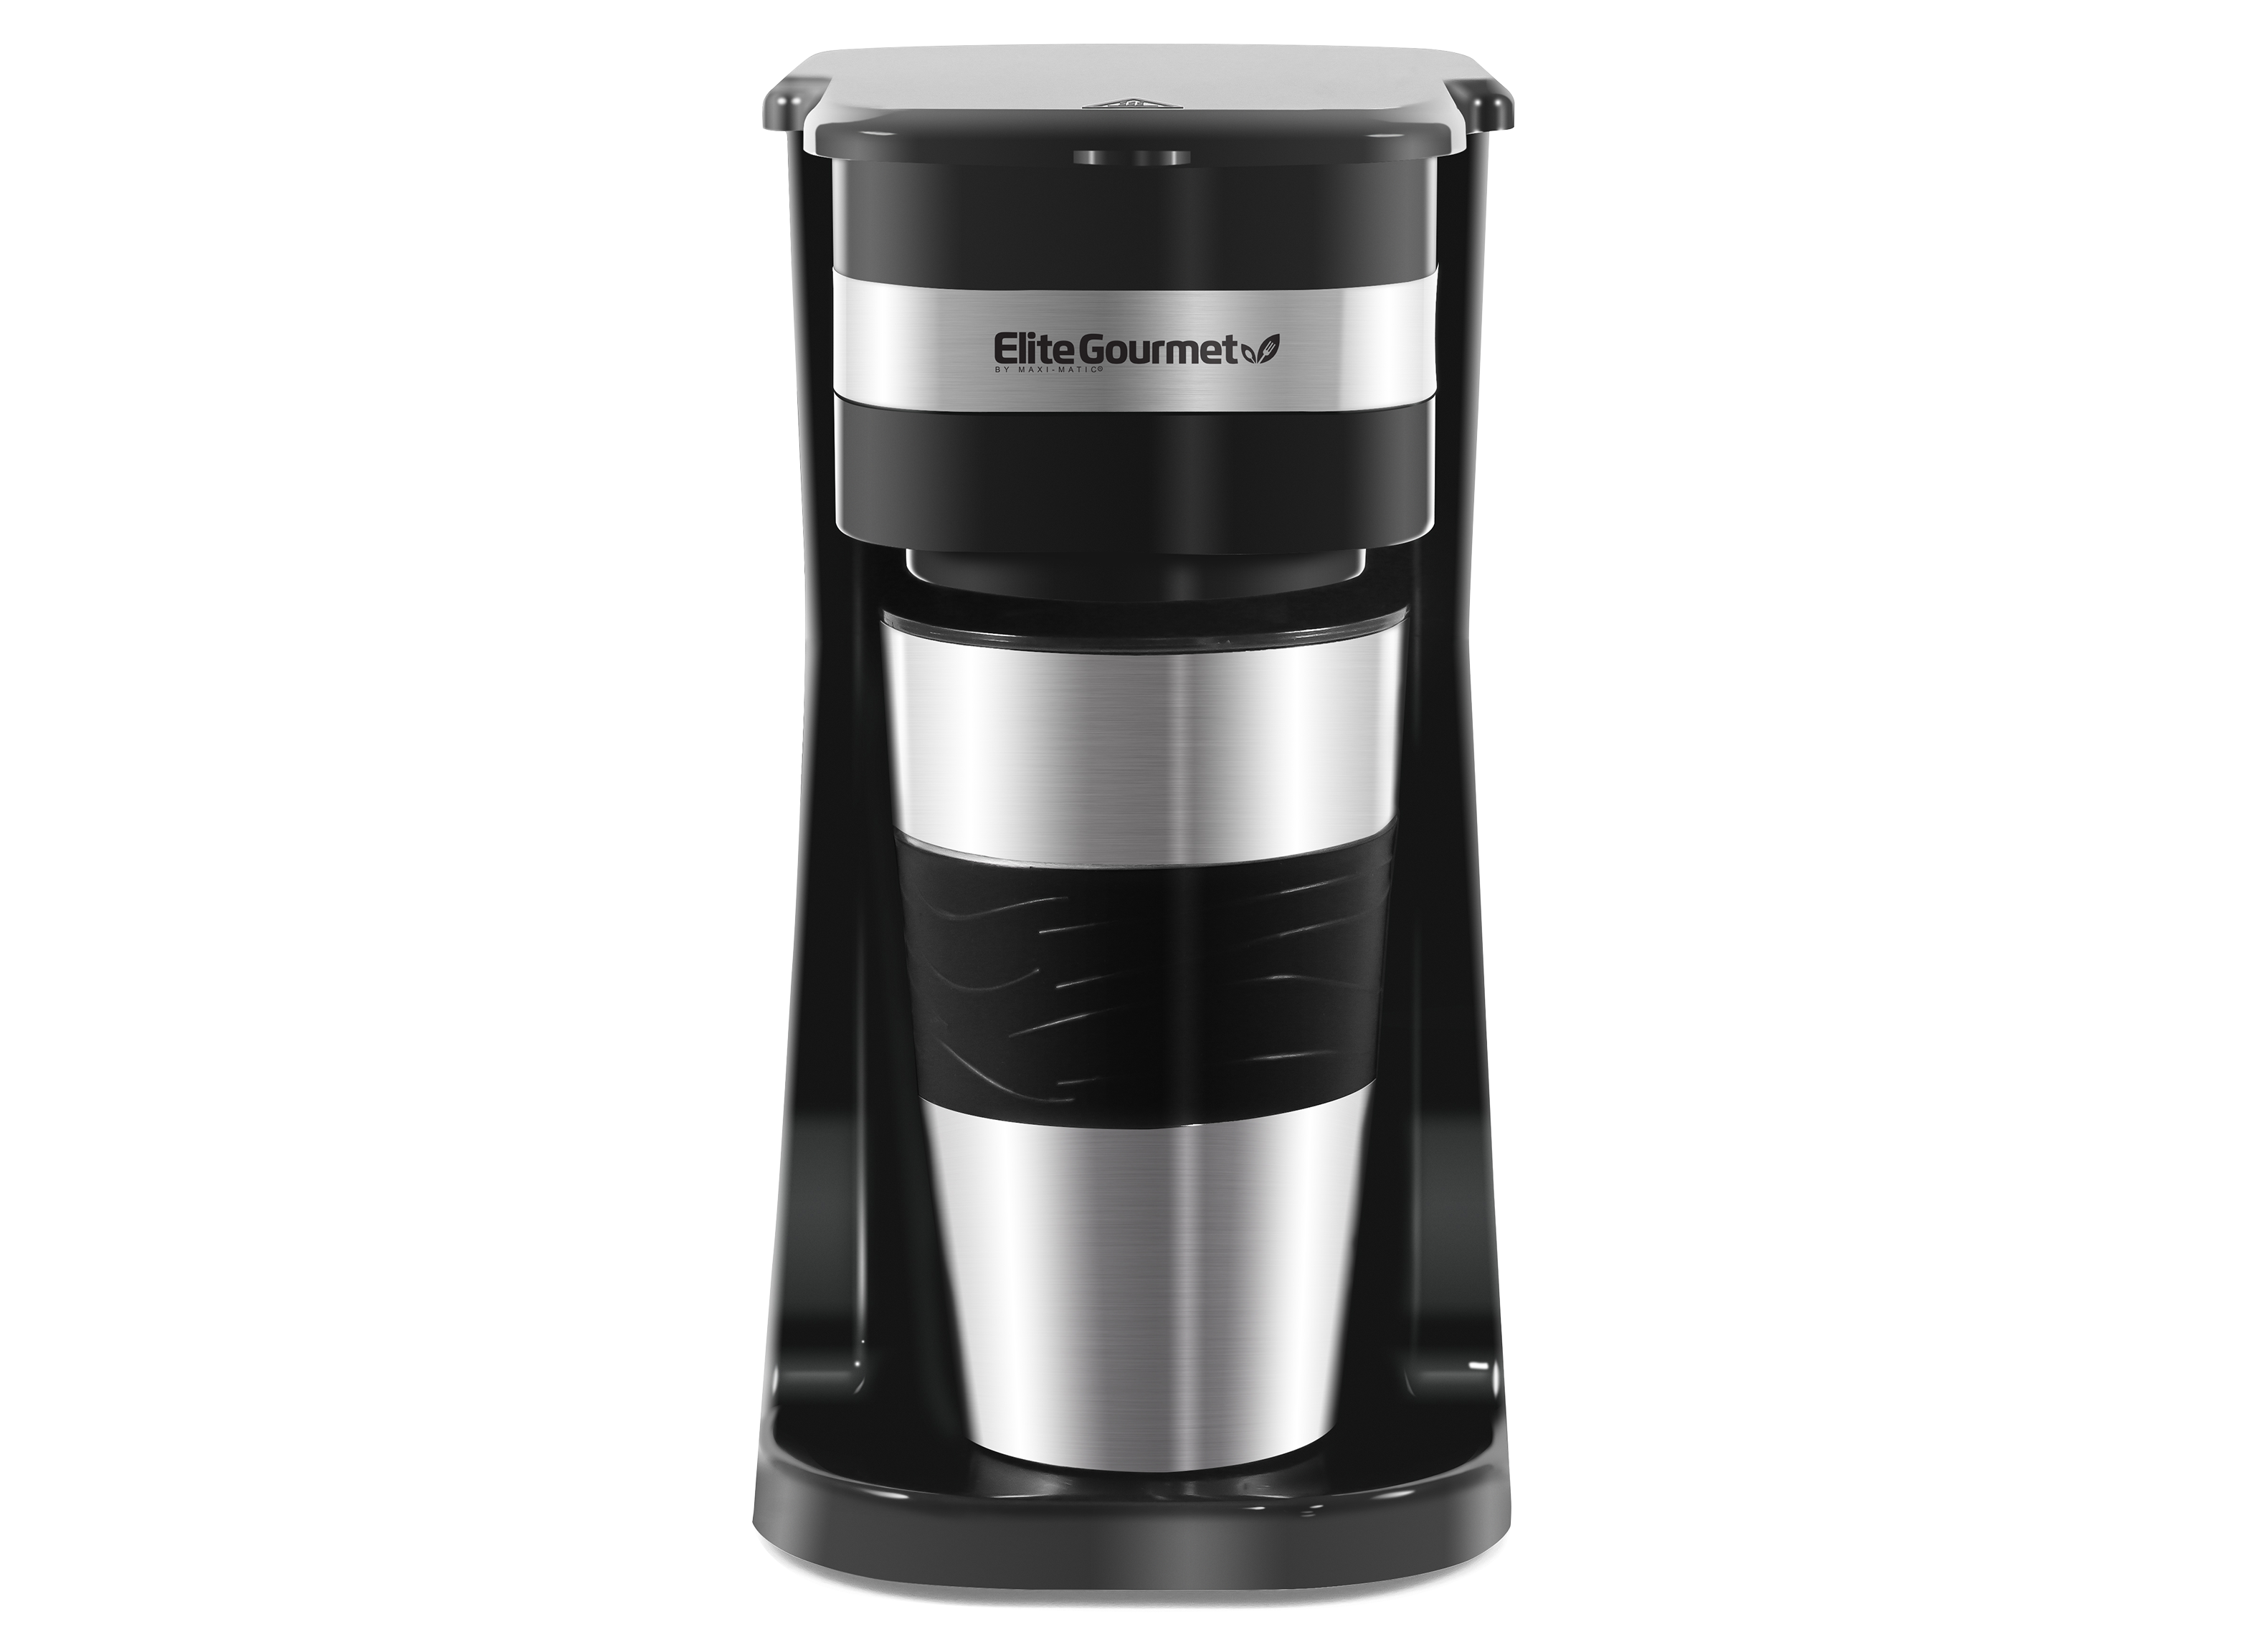 In this video, I am reviewing the elite gourmet coffee maker. It